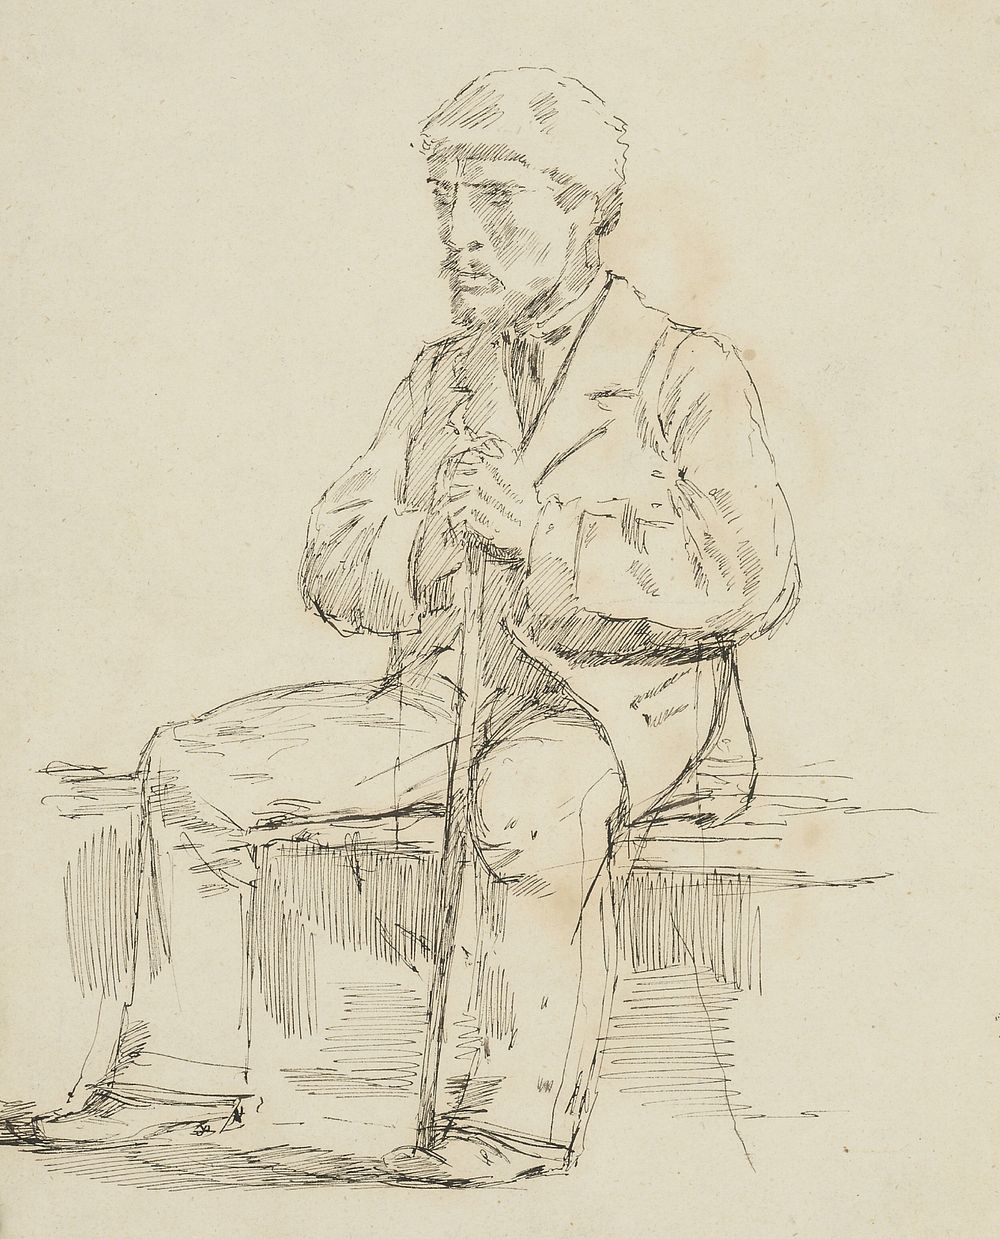 On the obverse, a study of a seated man with a cane